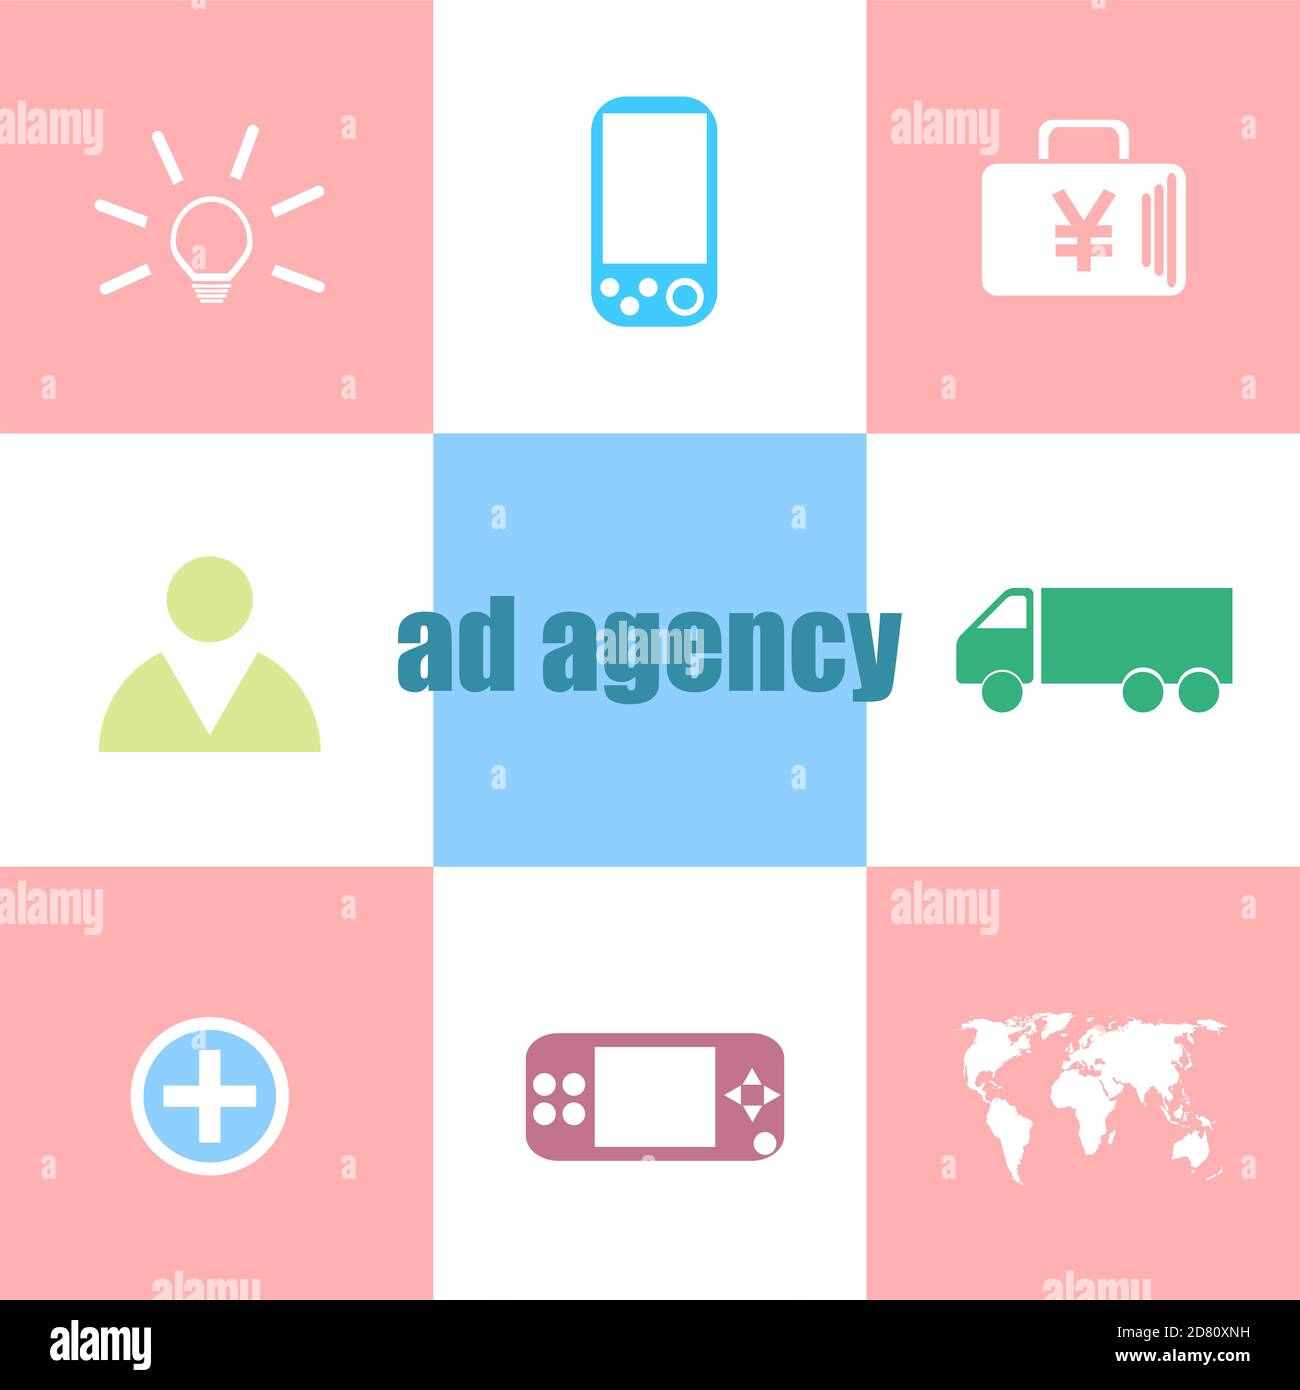 Text Ad agency. Management concept . Can be used for workflow layout, diagram, business step options, banner . Infographic dashboard ui interface temp Stock Photo